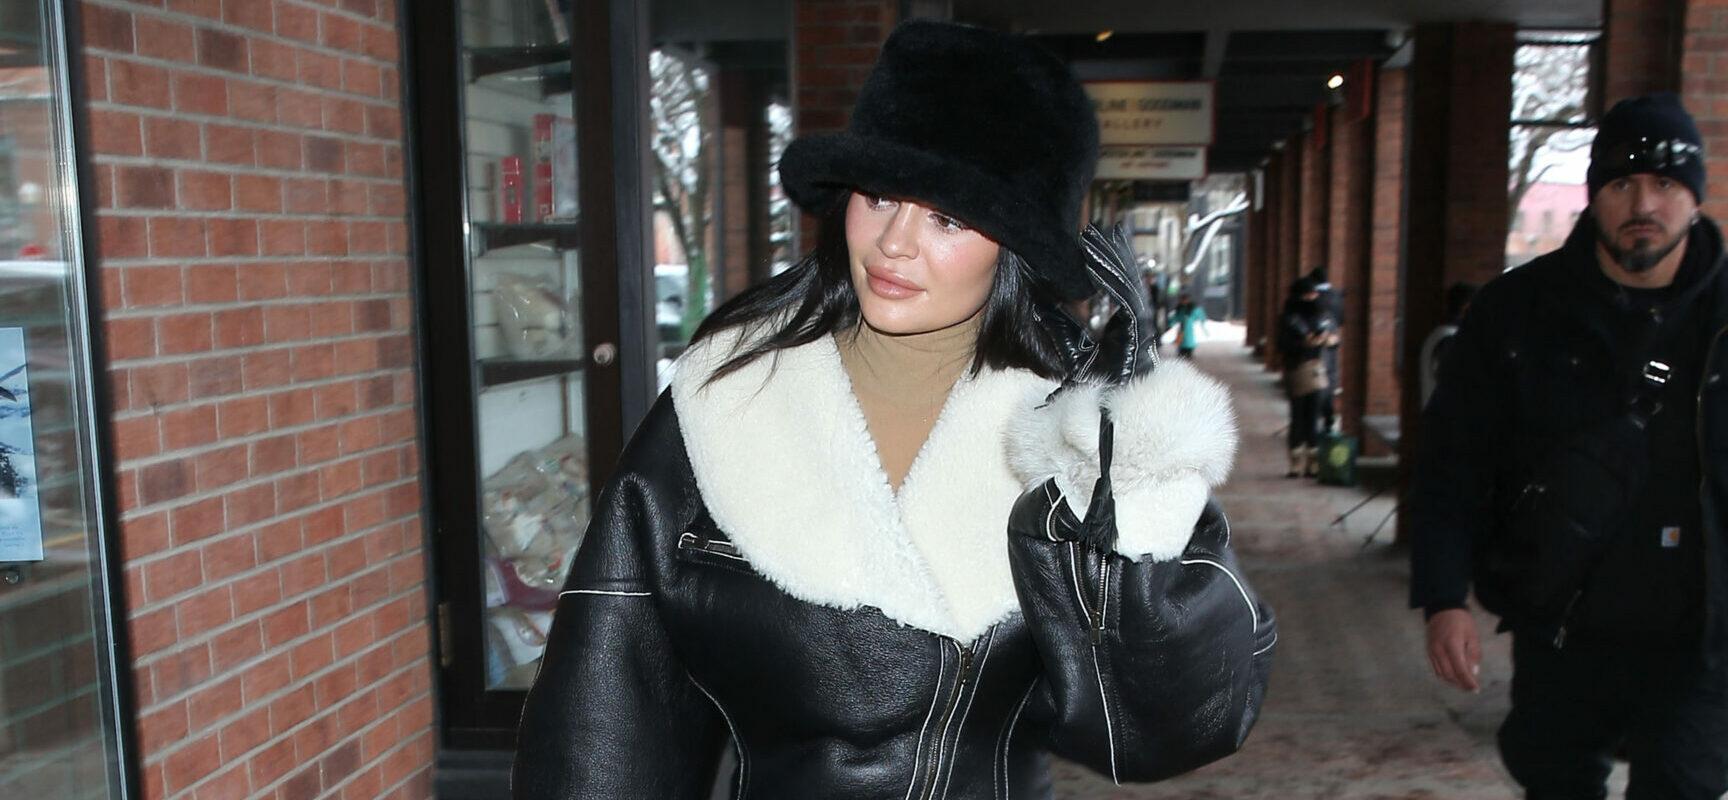 Kylie Jenner steps out in a cute Winter designer outfit for some retail therapy in Aspen Colorado